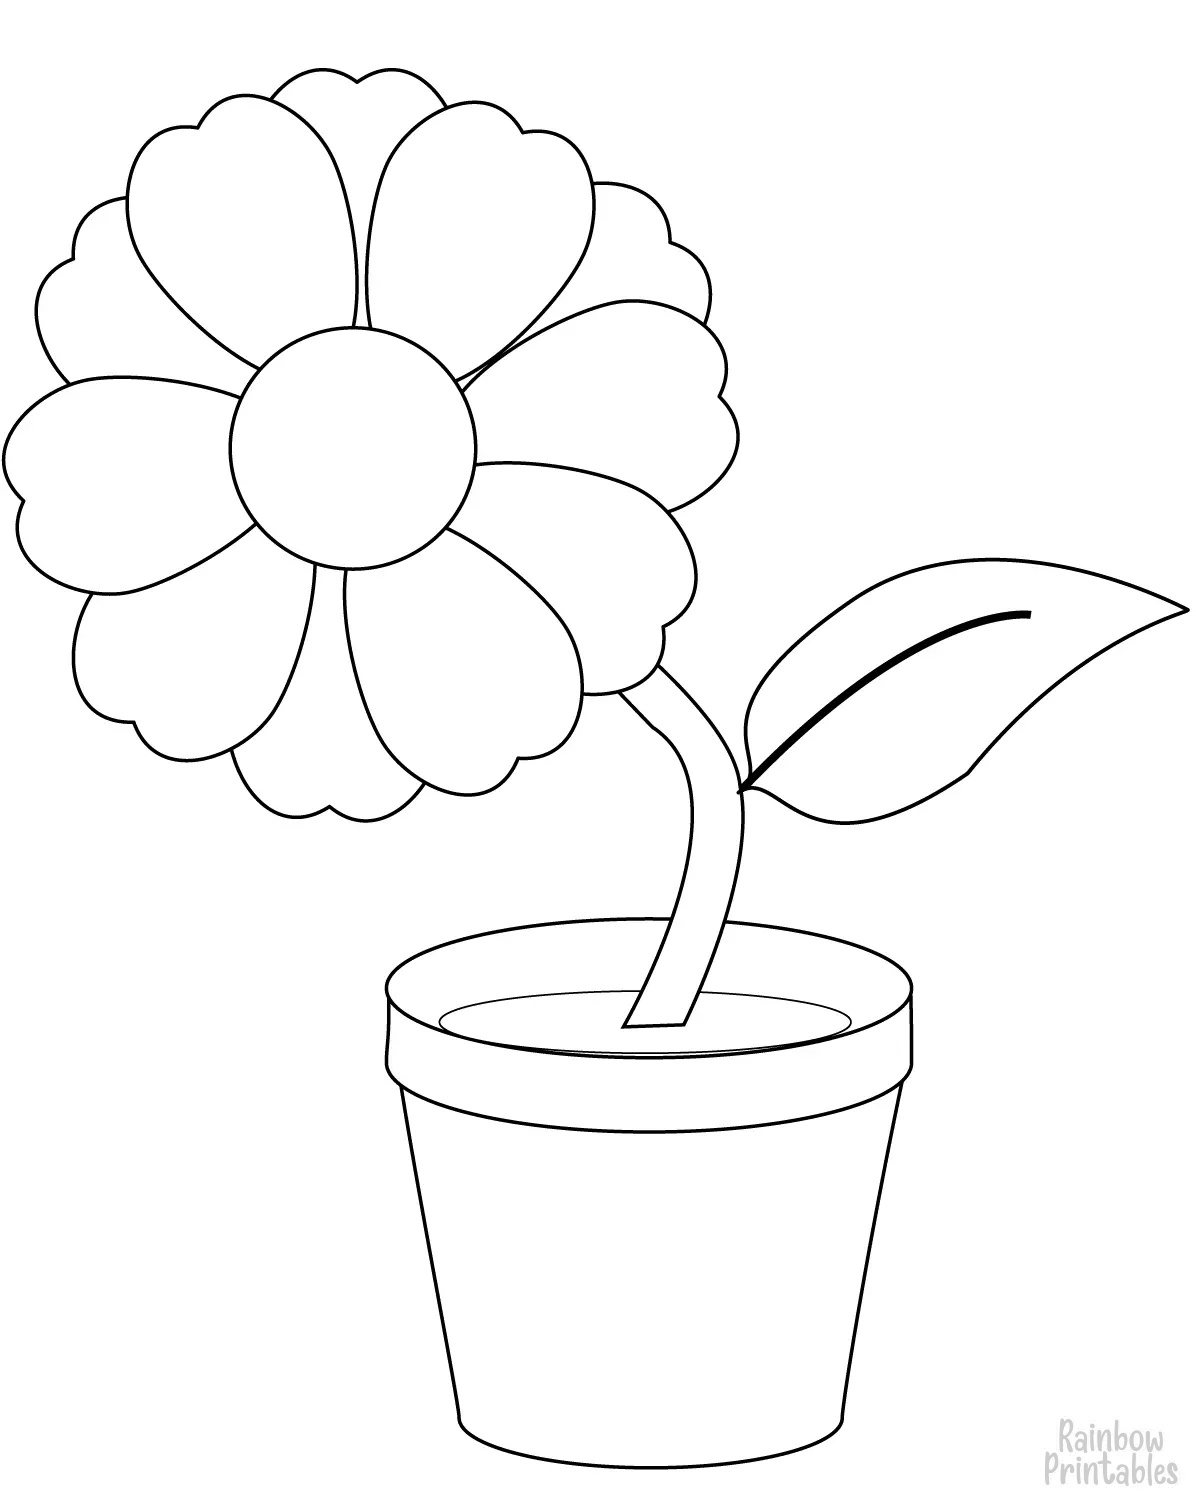 SIMPLE-EASY-line-drawings-FLOWER IN A POT-coloring-page-for-kids Outline